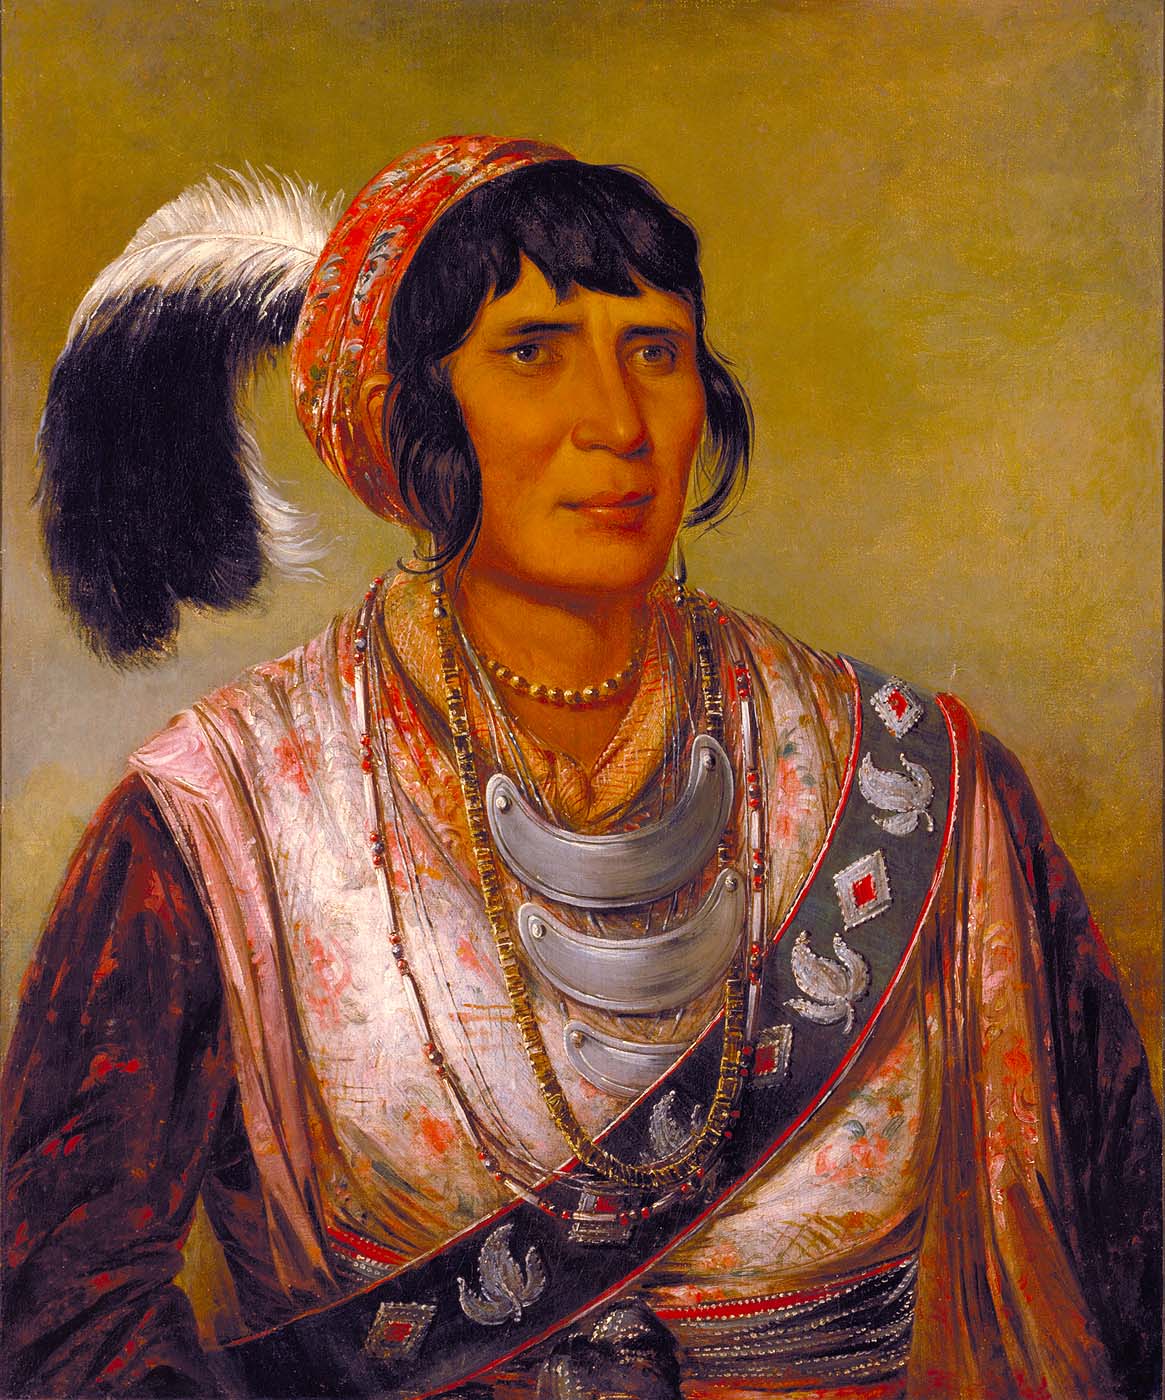 A portrait of Seminole leader Osceola, called "Os-ce-o-lá, The Black Drink, a Warrior of Great Distinction" by Geroge Catlin. Osceola wears colorful robes, a headband holding three feathers, and three ceremonial gorgets draped around his neck. 